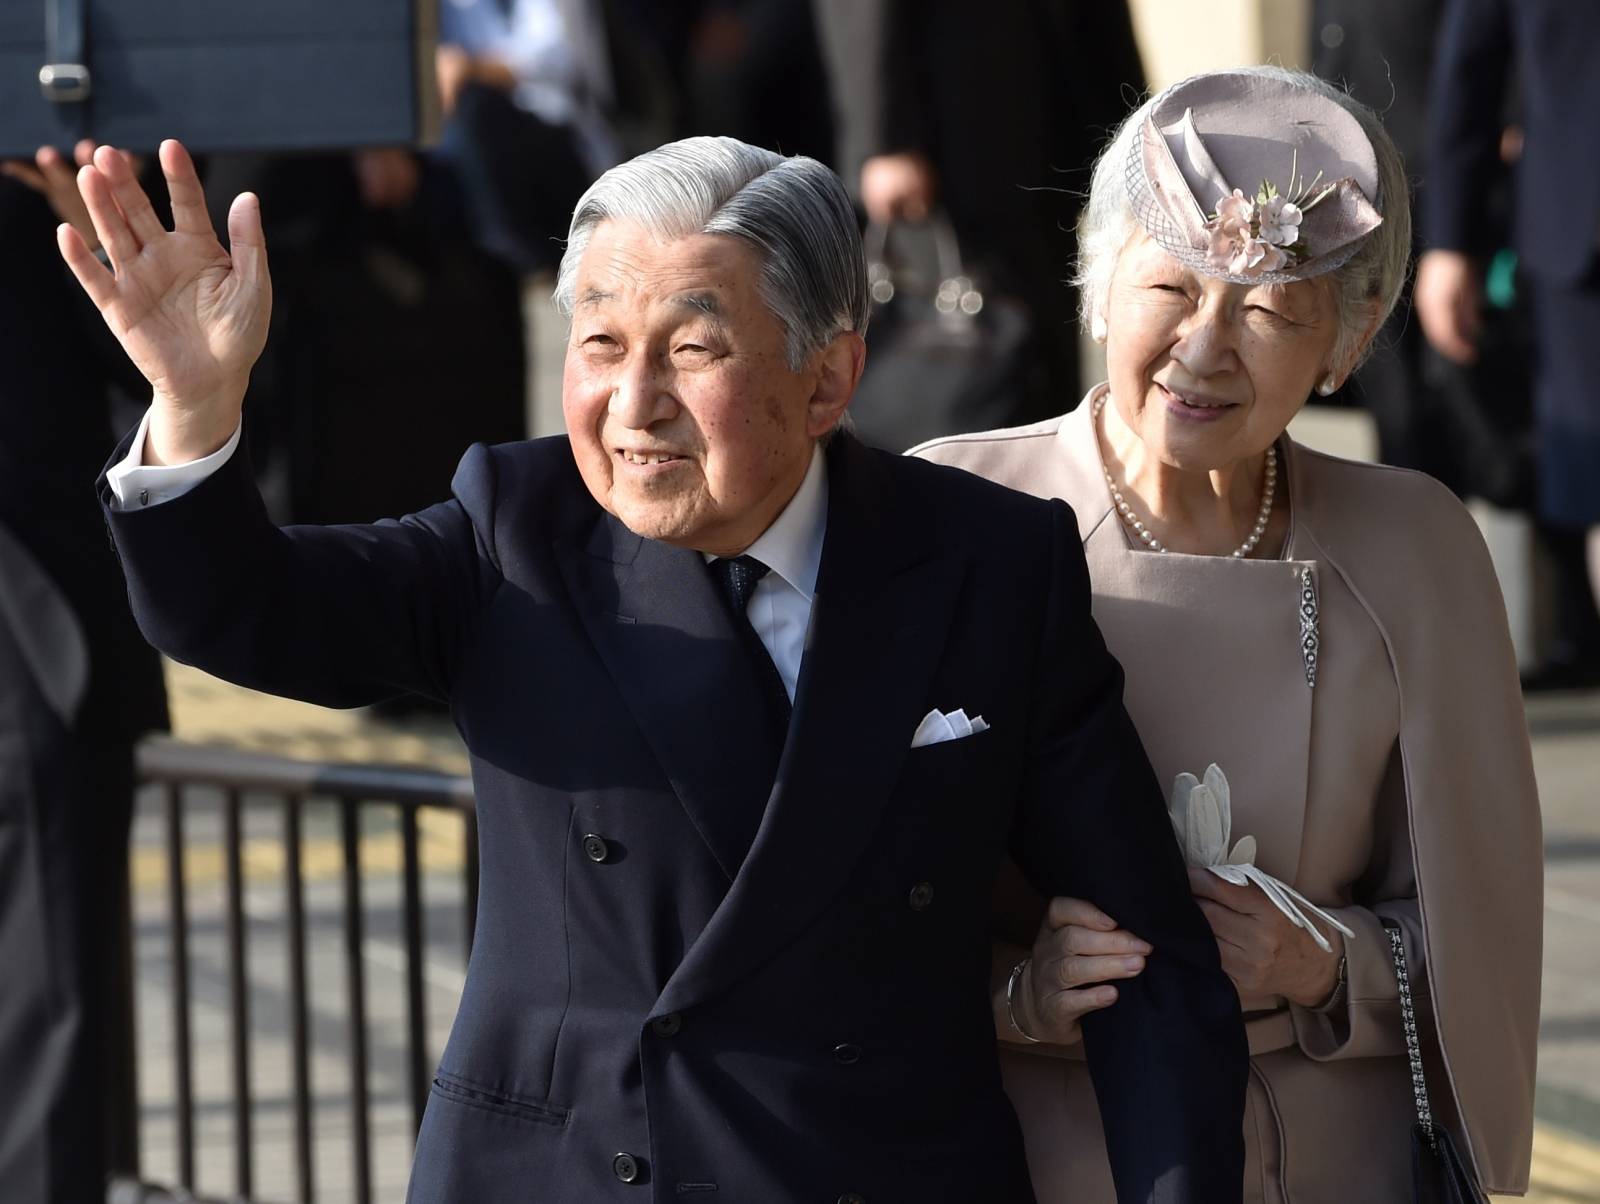 Japan's Emperor Akihito, accompanied by Empress Michiko, waves to well-wishers before leaving Ujiyamada Station after their visit to Ise Jingu shrine in Ise, Japan